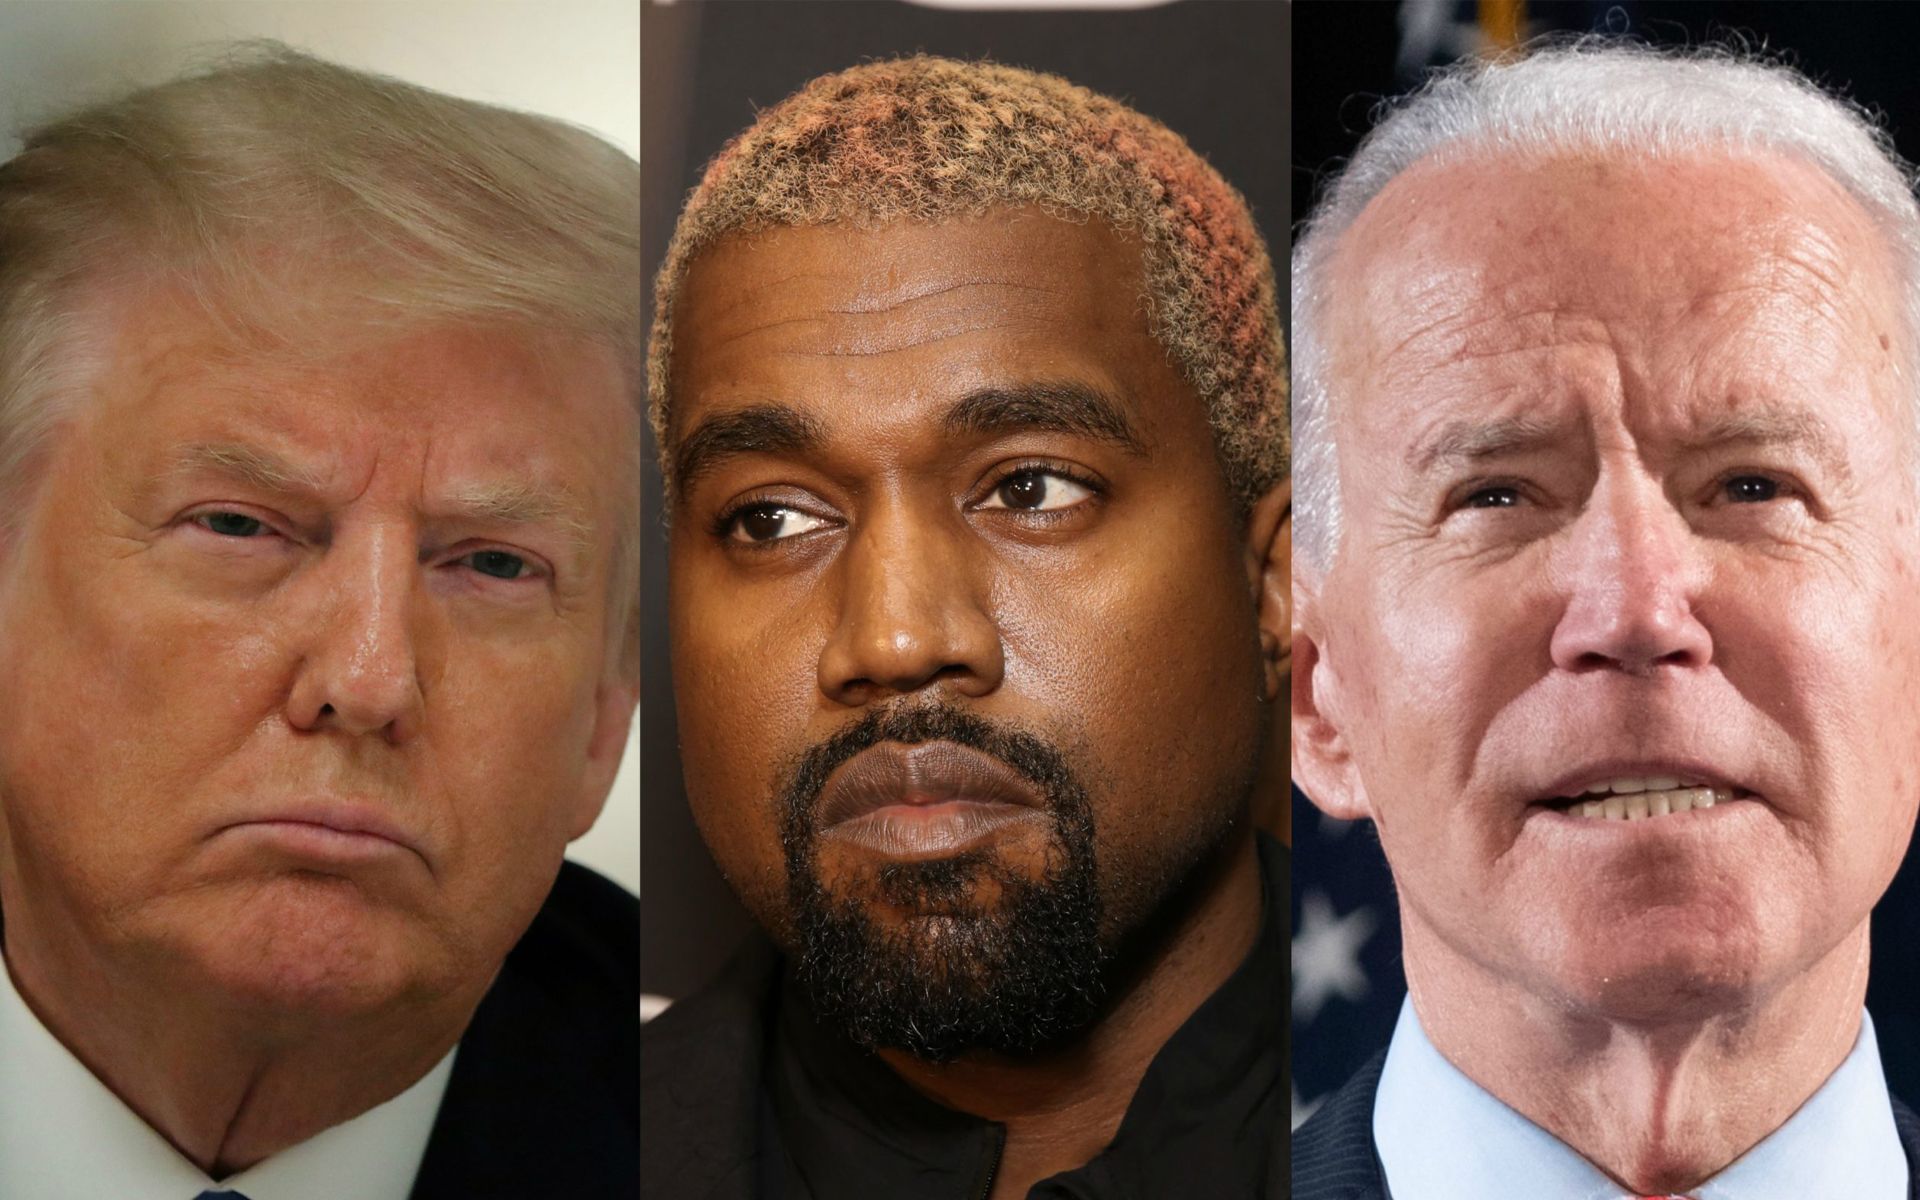 BREAKING: Trump And Biden Worked Together To Stop Kanye Presidency